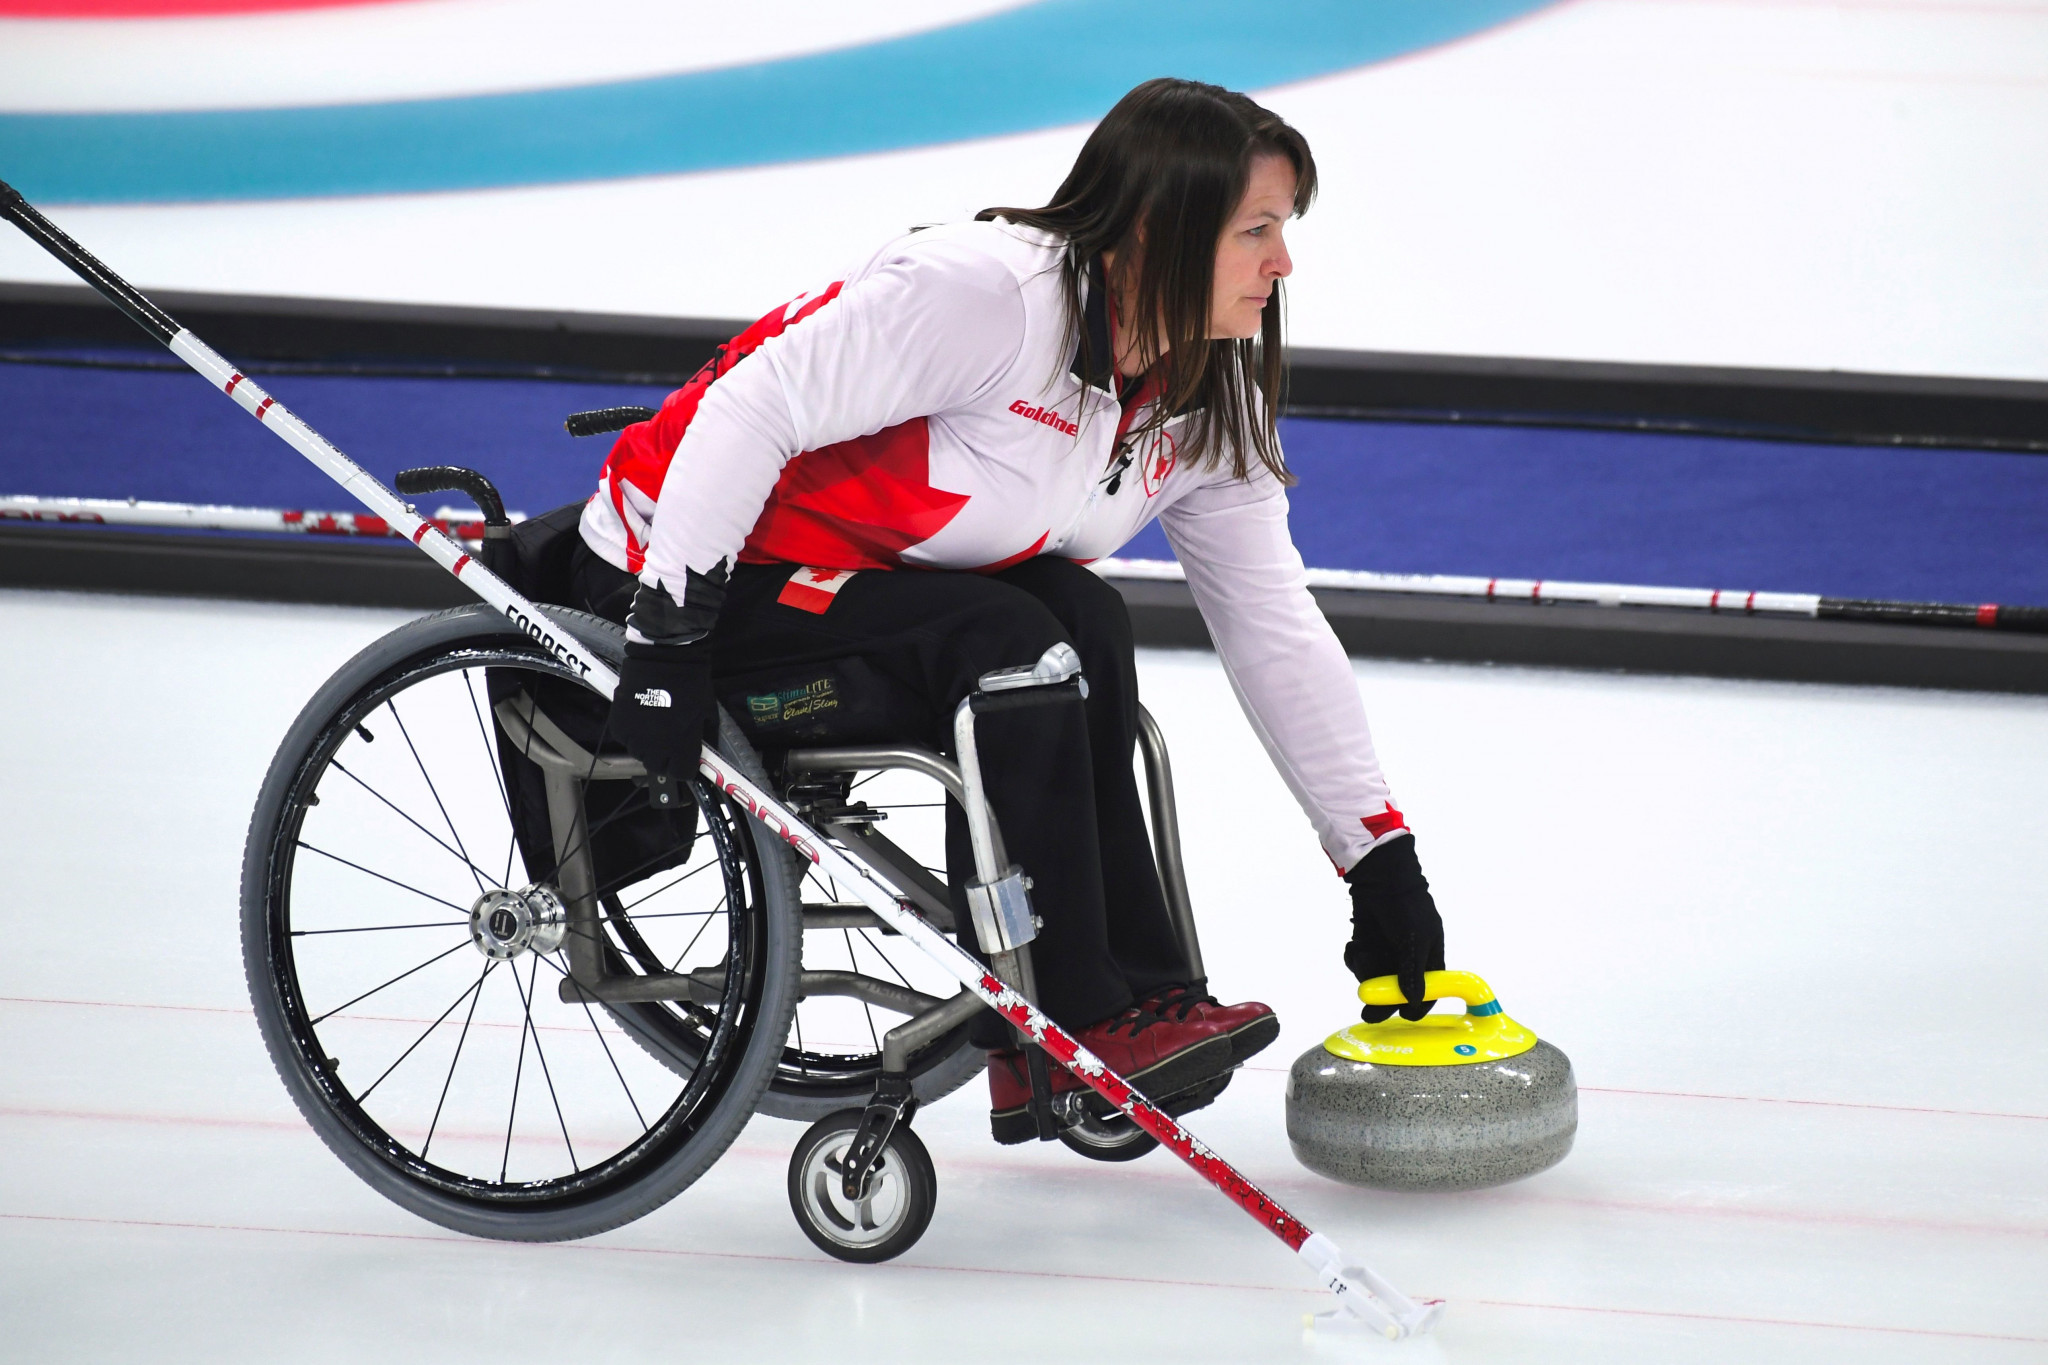 Wheelchair curler Ina Forrest, who won gold at Vancouver 2010 and Sochi 2014, is bidding to join the Canadian Paralympic Athletes’ Council ©Getty Images